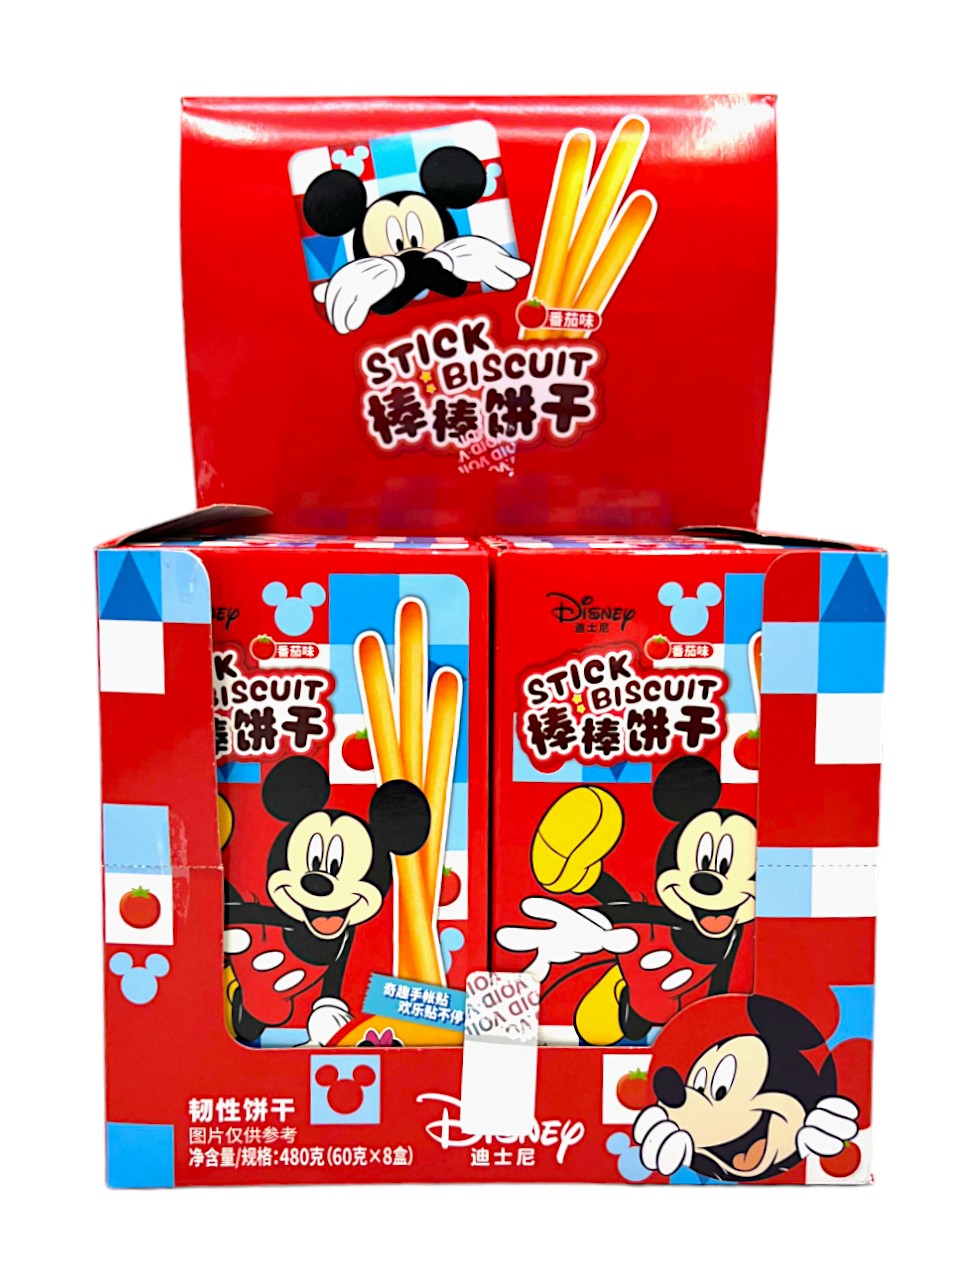 BinQi Disney Mickey Mouse Stick Biscuit Pack of 8 (China)